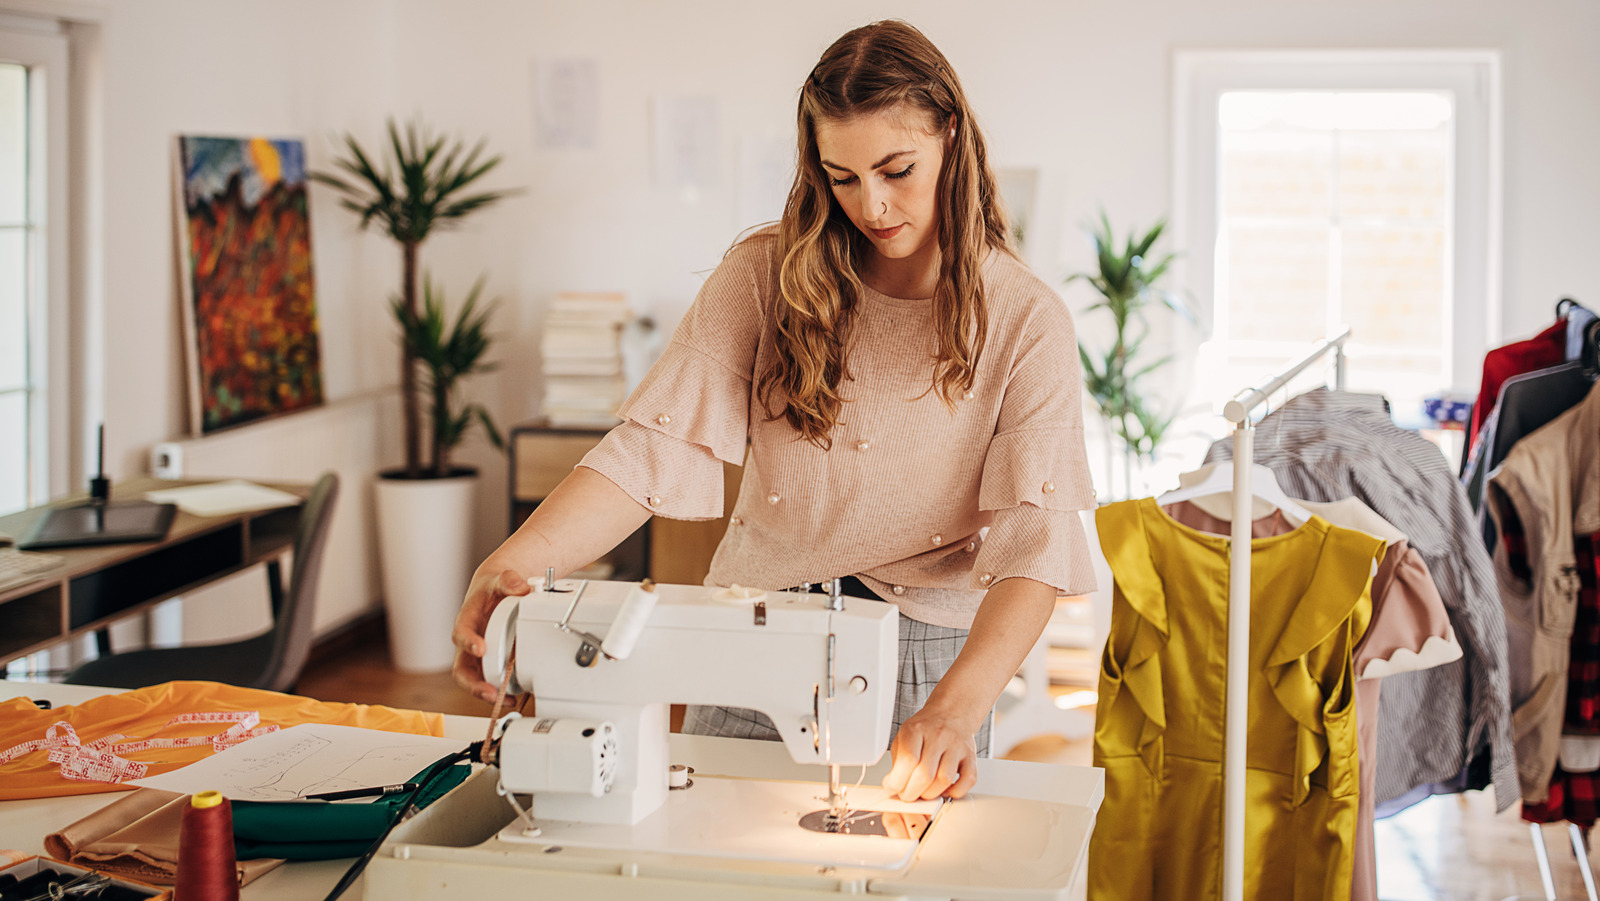 The first step for making your own clothes – sewing-plus